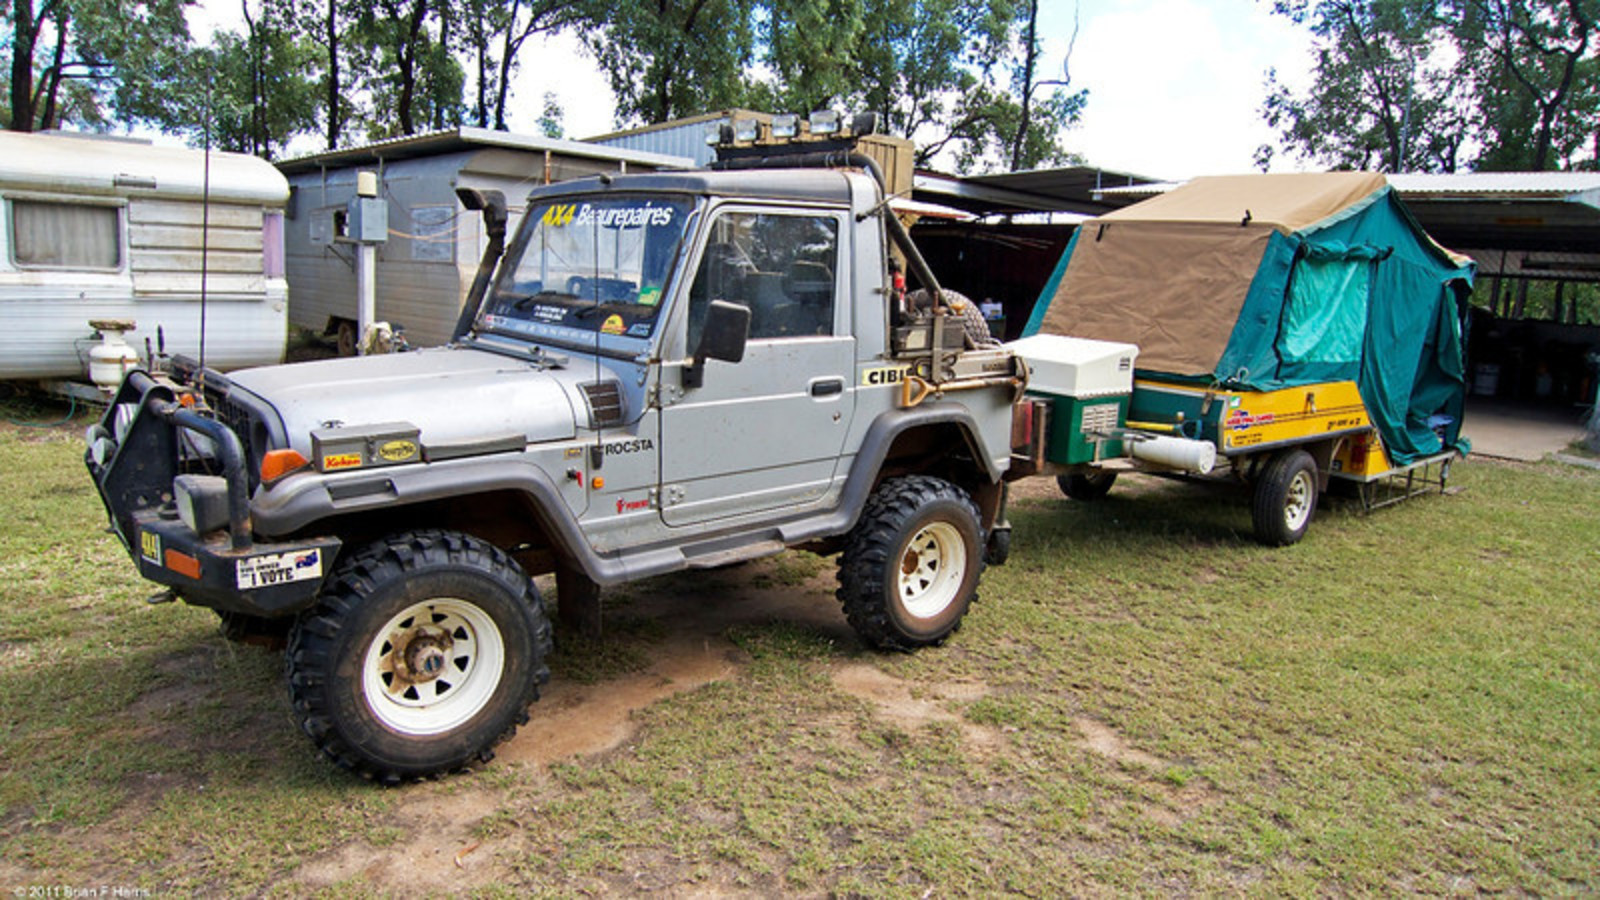 1994 Asia ROCSTA 2.2Ltr diesel (Mazda R2 type) i bought new from ...